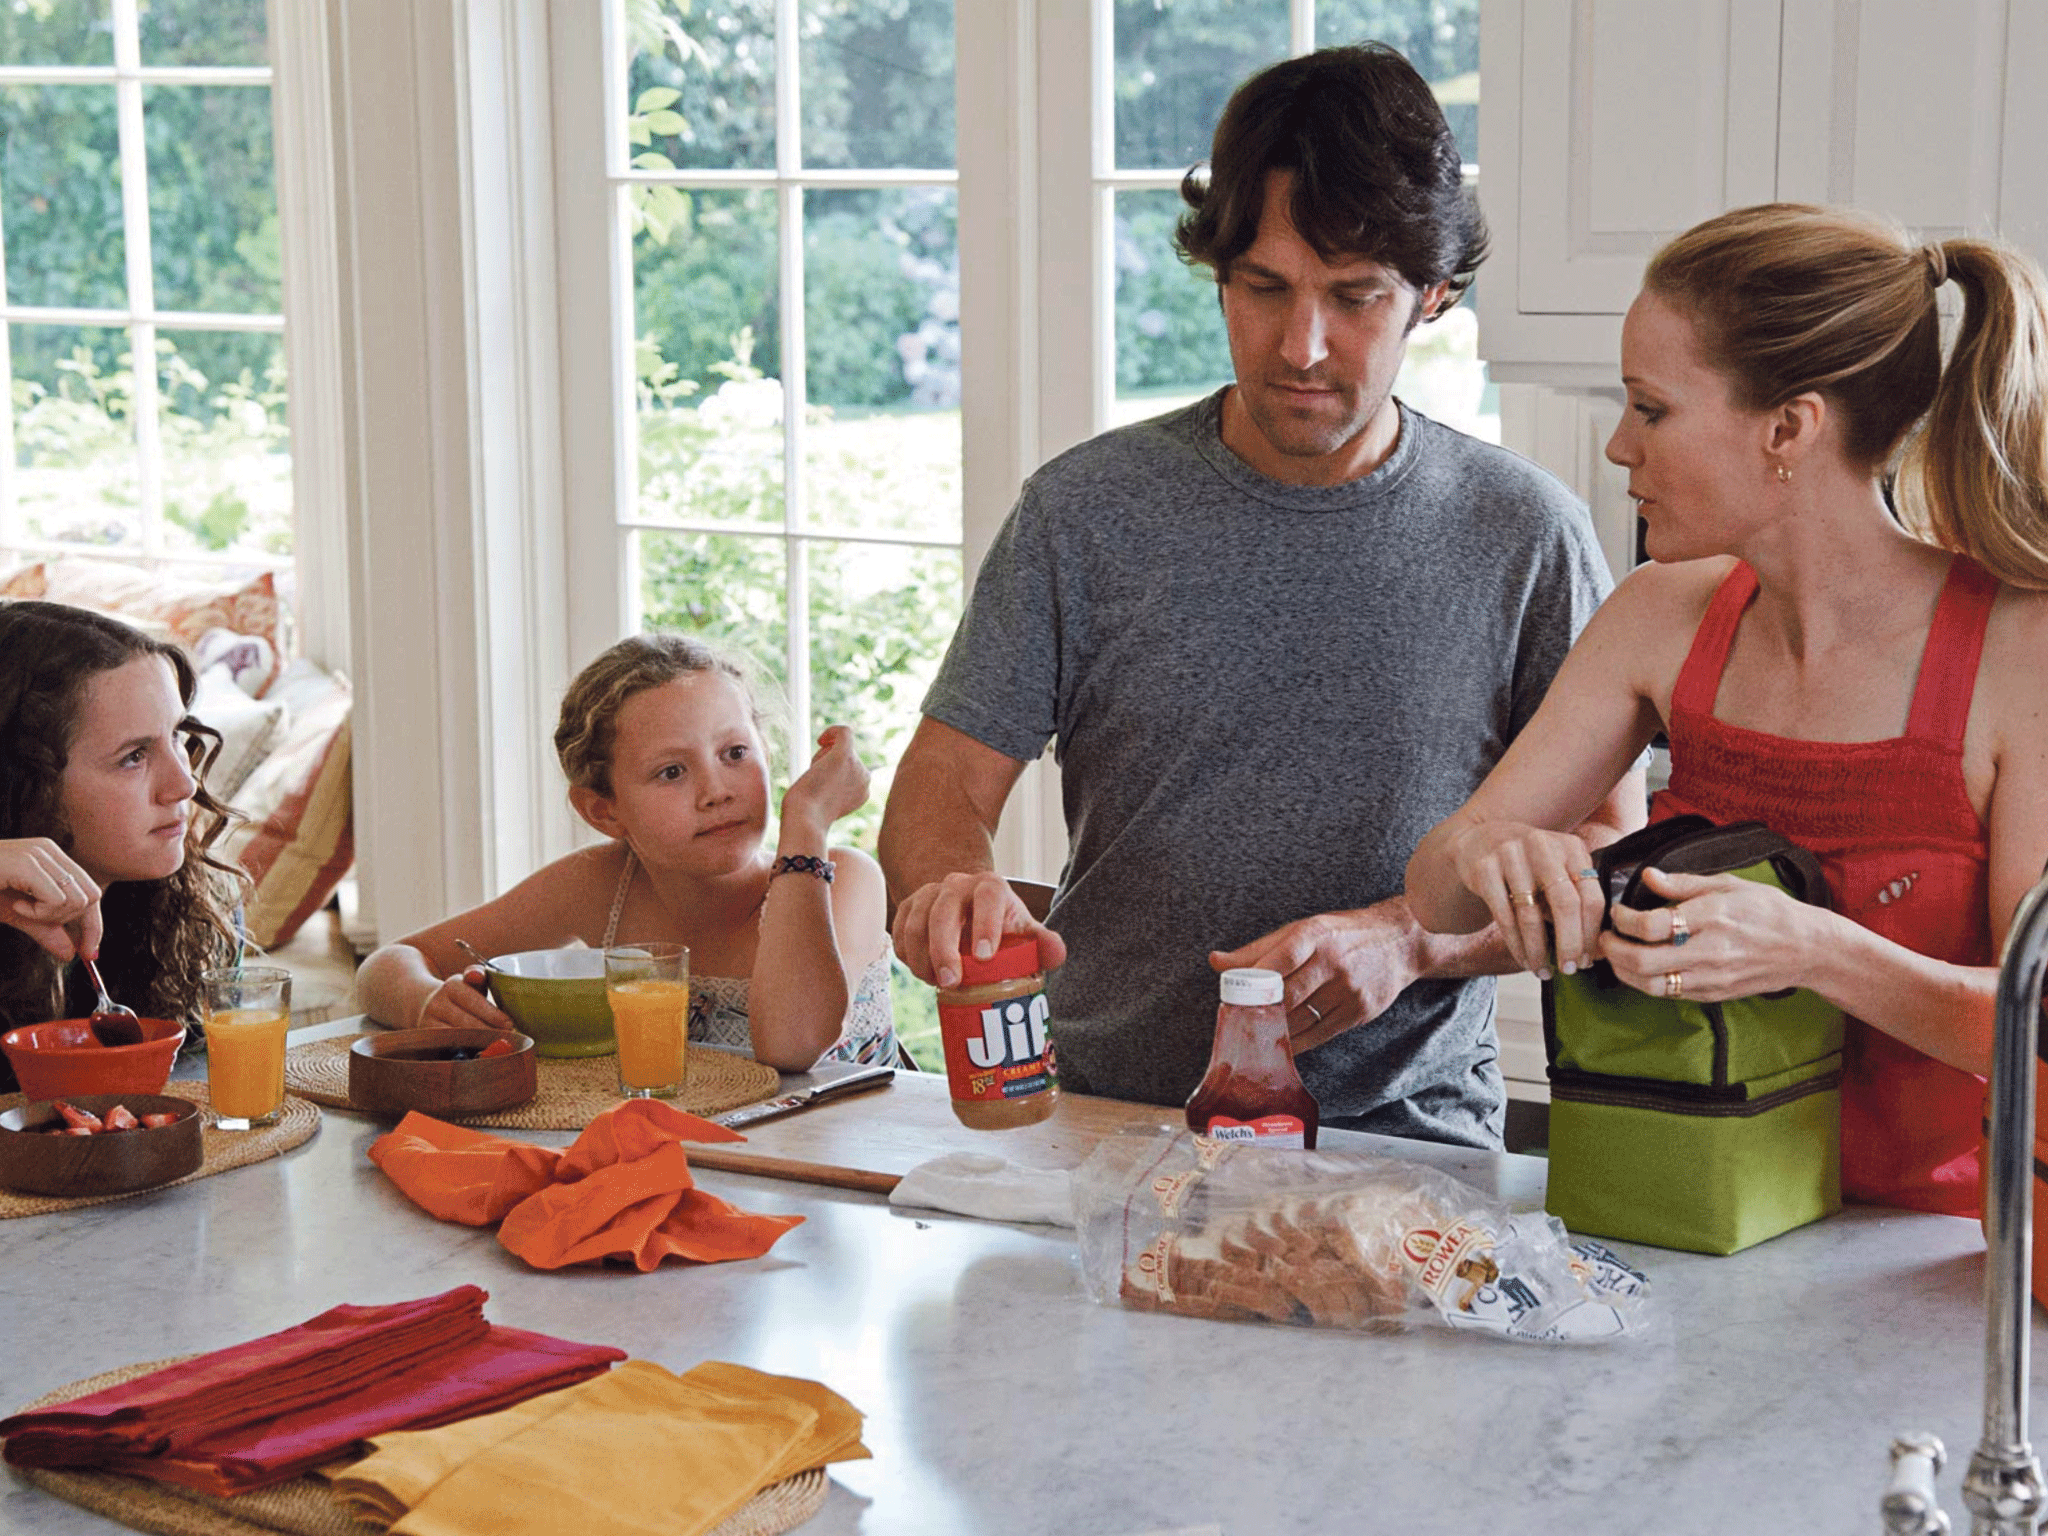 Grin and bare it: Paul Rudd and Leslie Mann in 'This Is 40'